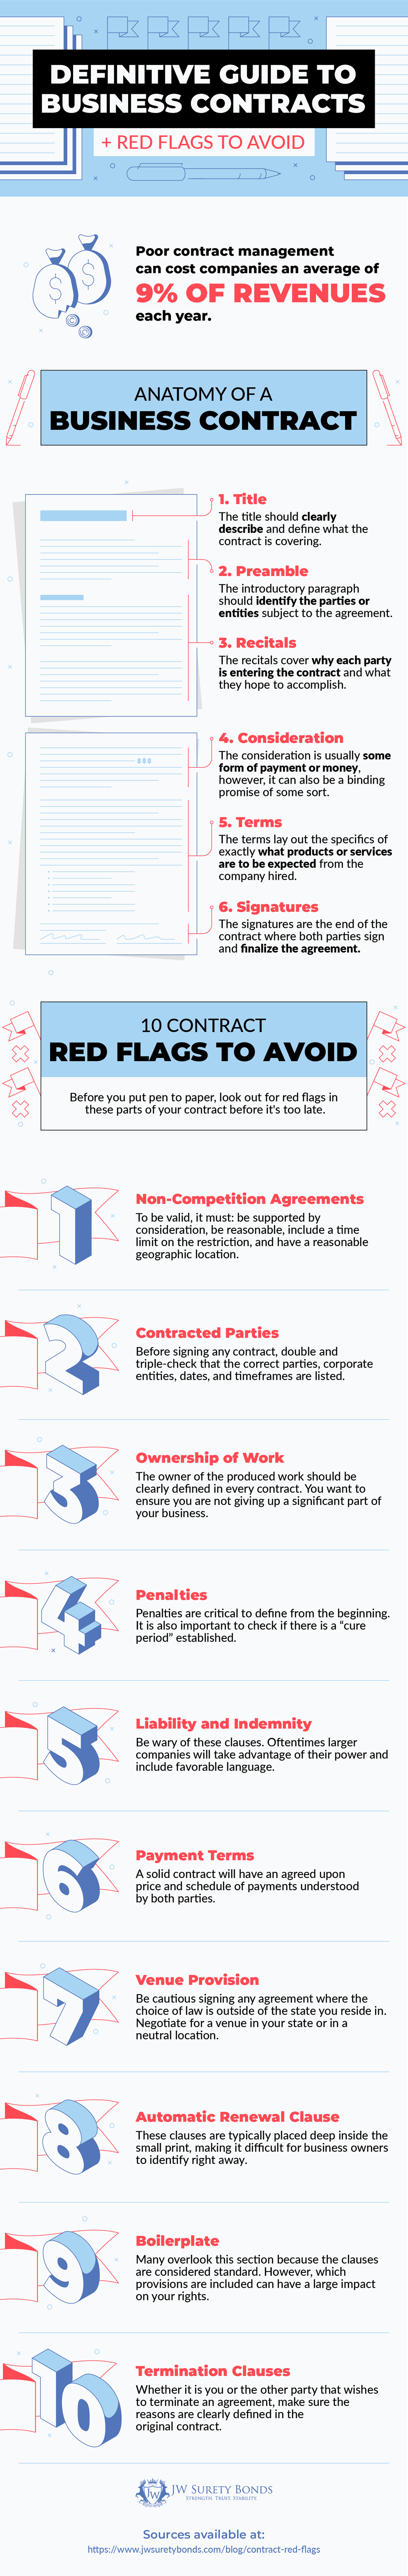 10 business contract red flags to look out for